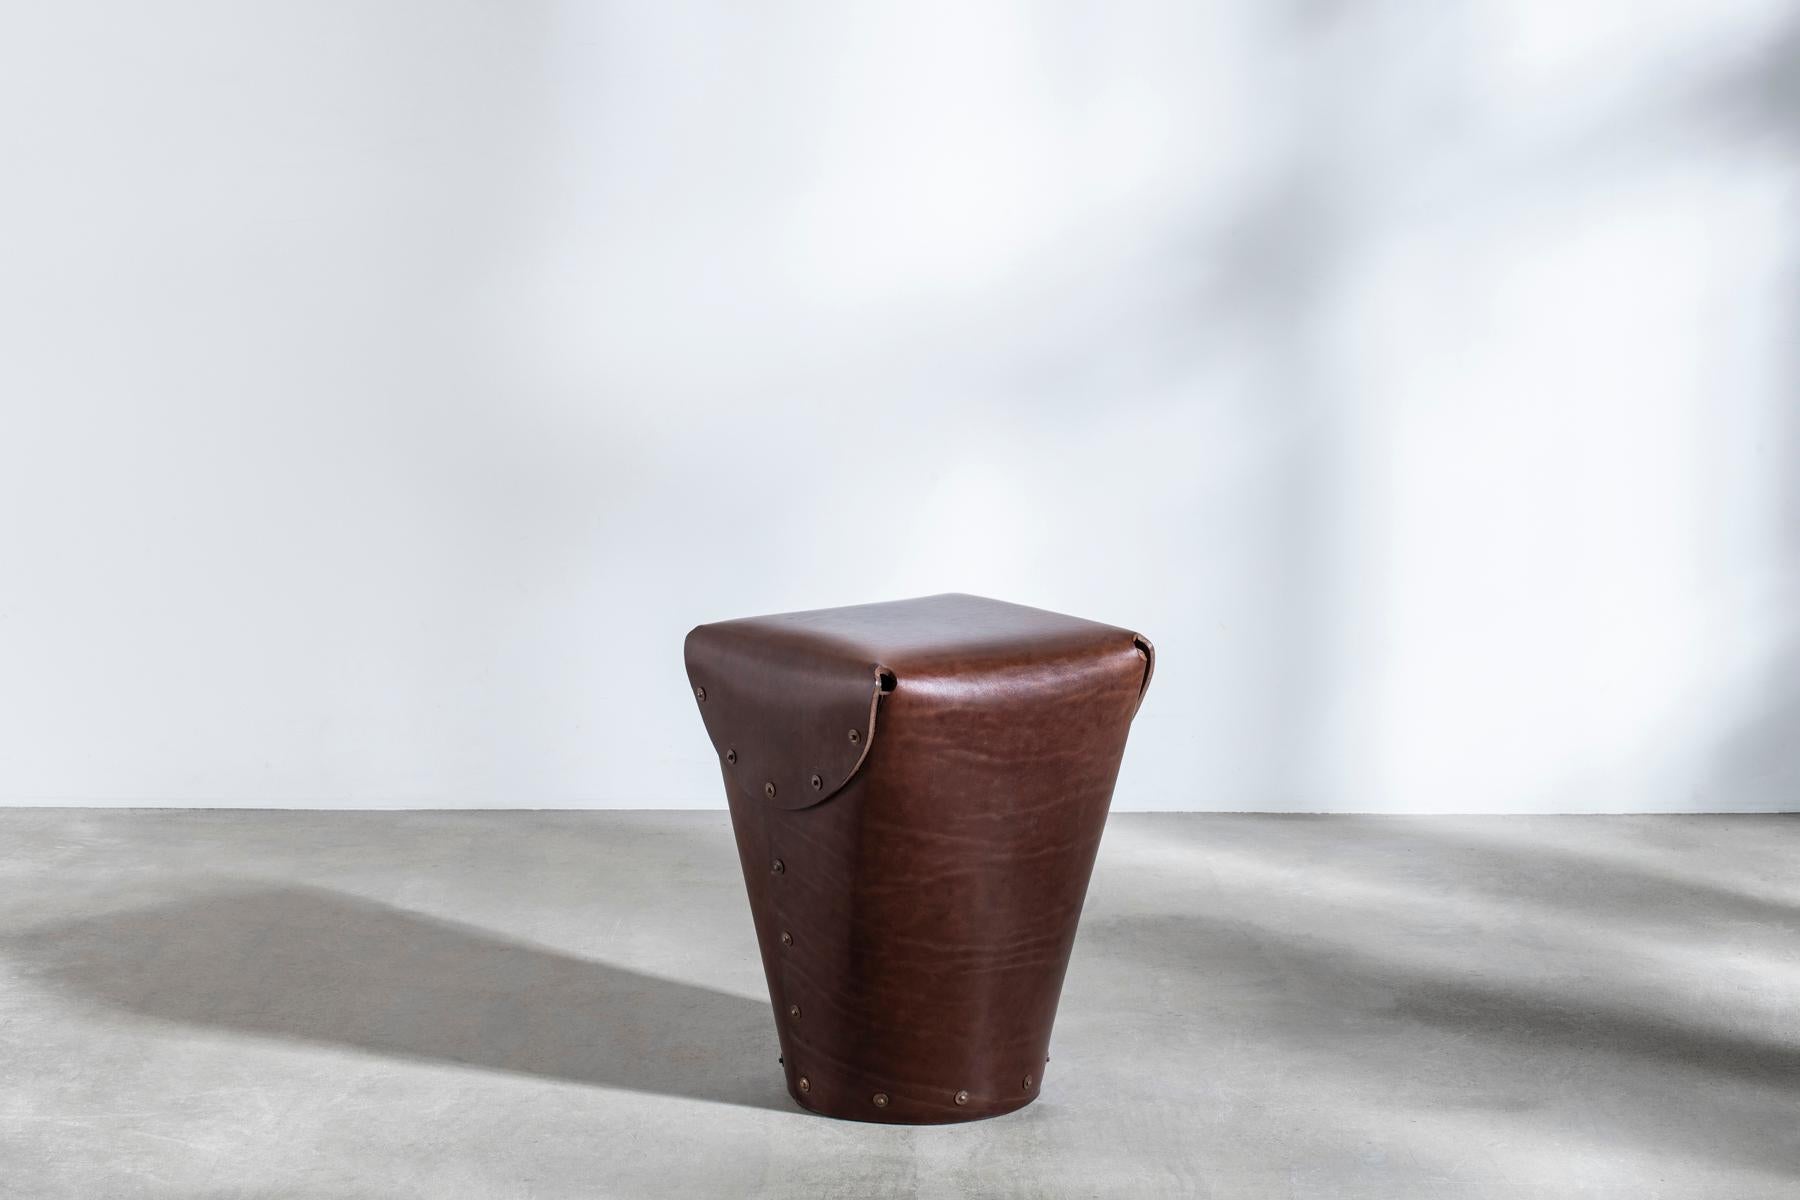 Introduced at London Design Festival 2017, the second iteration of the Bill Amberg Rivet Stool is presented in dark brown bridle leather.

Handmade at the Bill Amberg workshops in London, the stool is made of a single, beautiful piece of 6mm